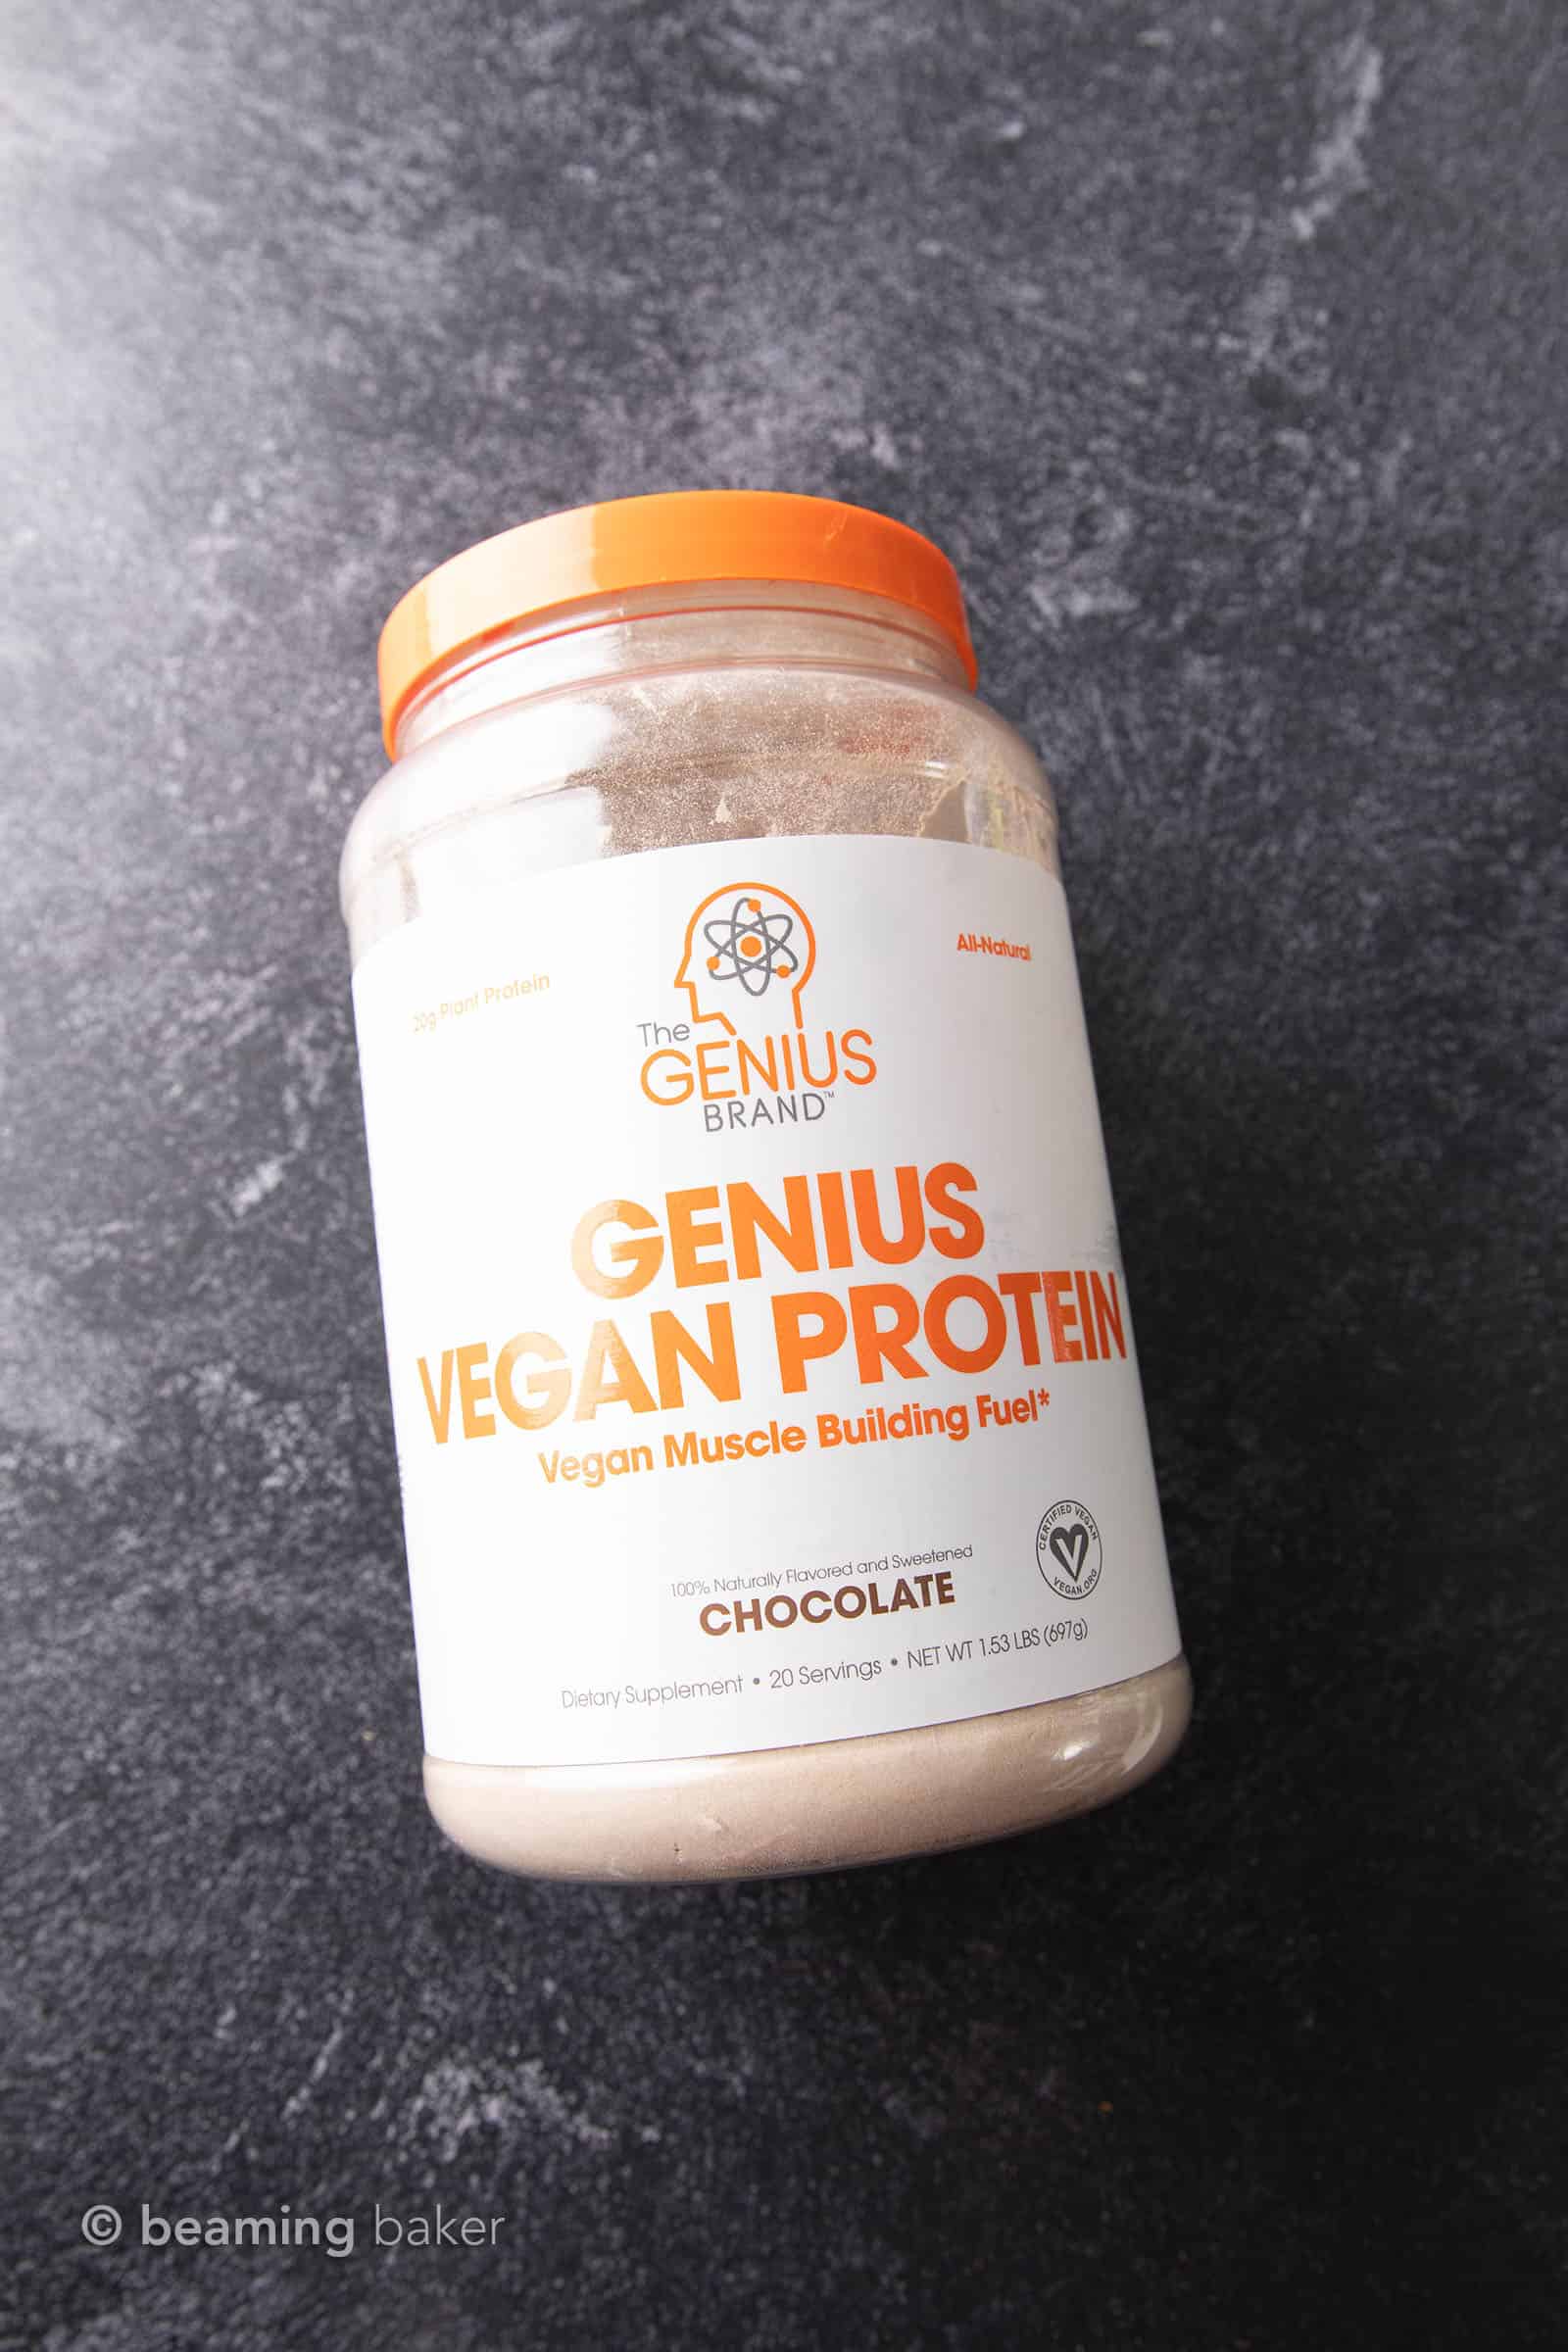 Best Vegan Protein Powder: Ranked. My review of the BEST tasting, healthiest Vegan protein powders to the WORST—Chocolate edition! Bonus: an EASY recipe for the best Plant Based Vegan Protein Powder Shake! #PlantBased #Vegan #Protein #Shakes #Healthy | Recipe at topqa.info